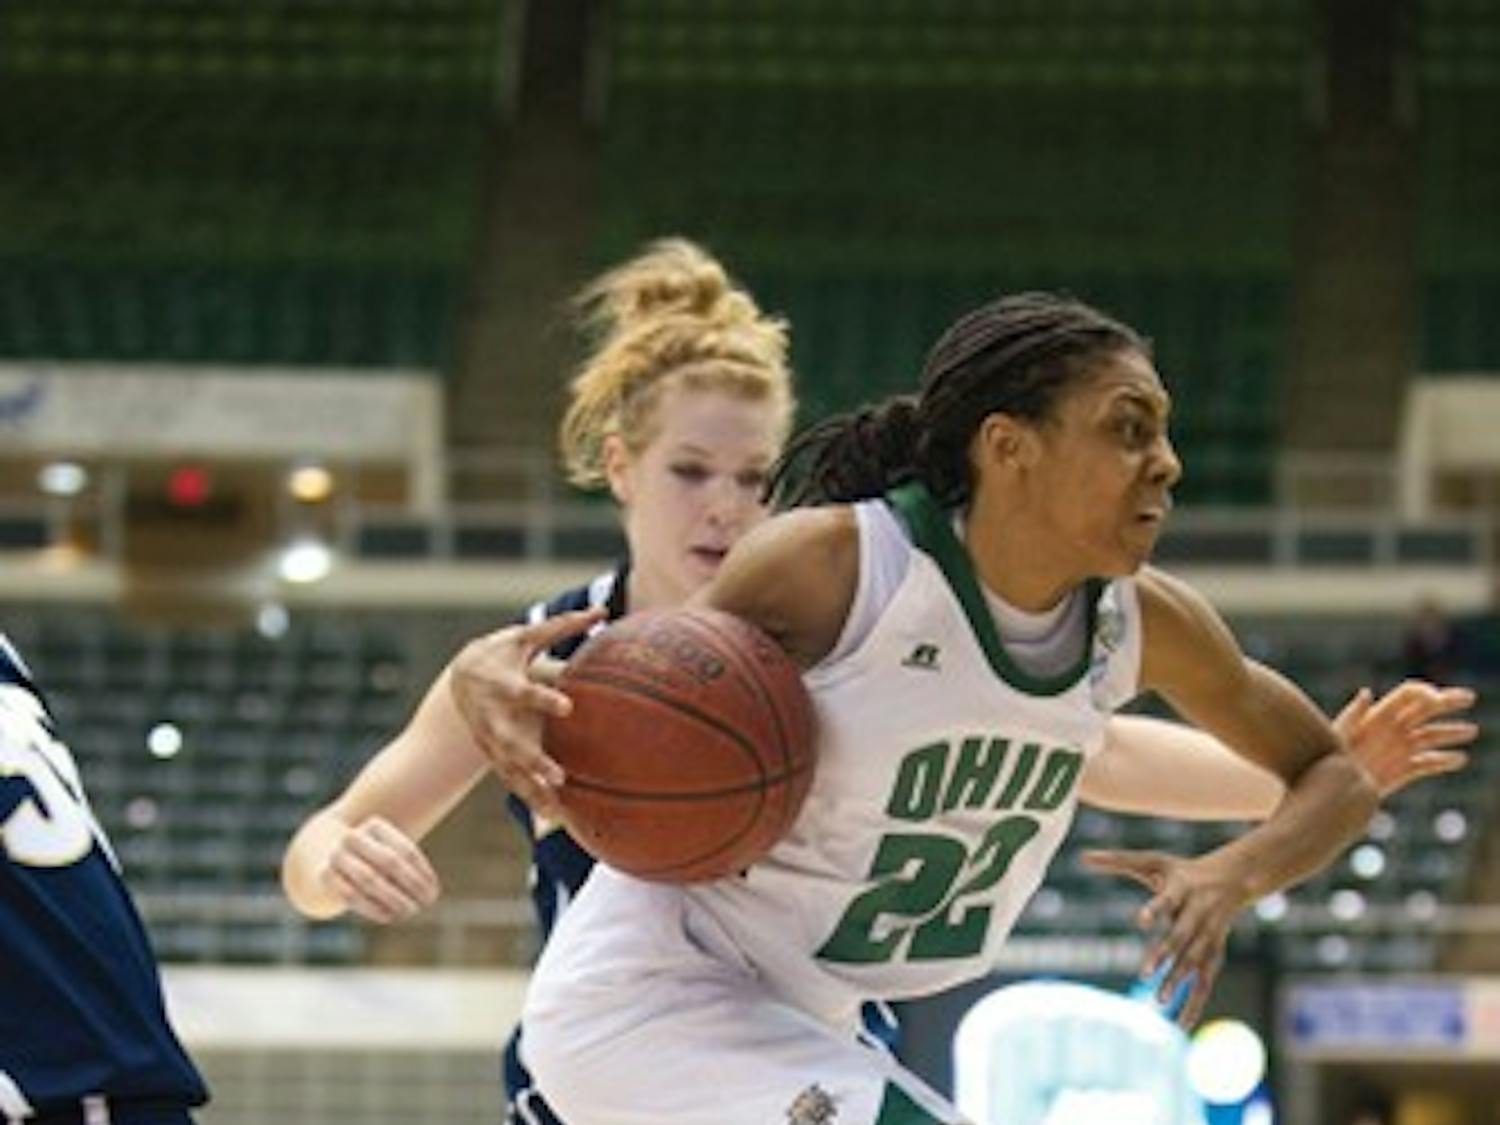 Women's Basketball: Height doesn't pose a problem as senior guard Benson hauls in boards  